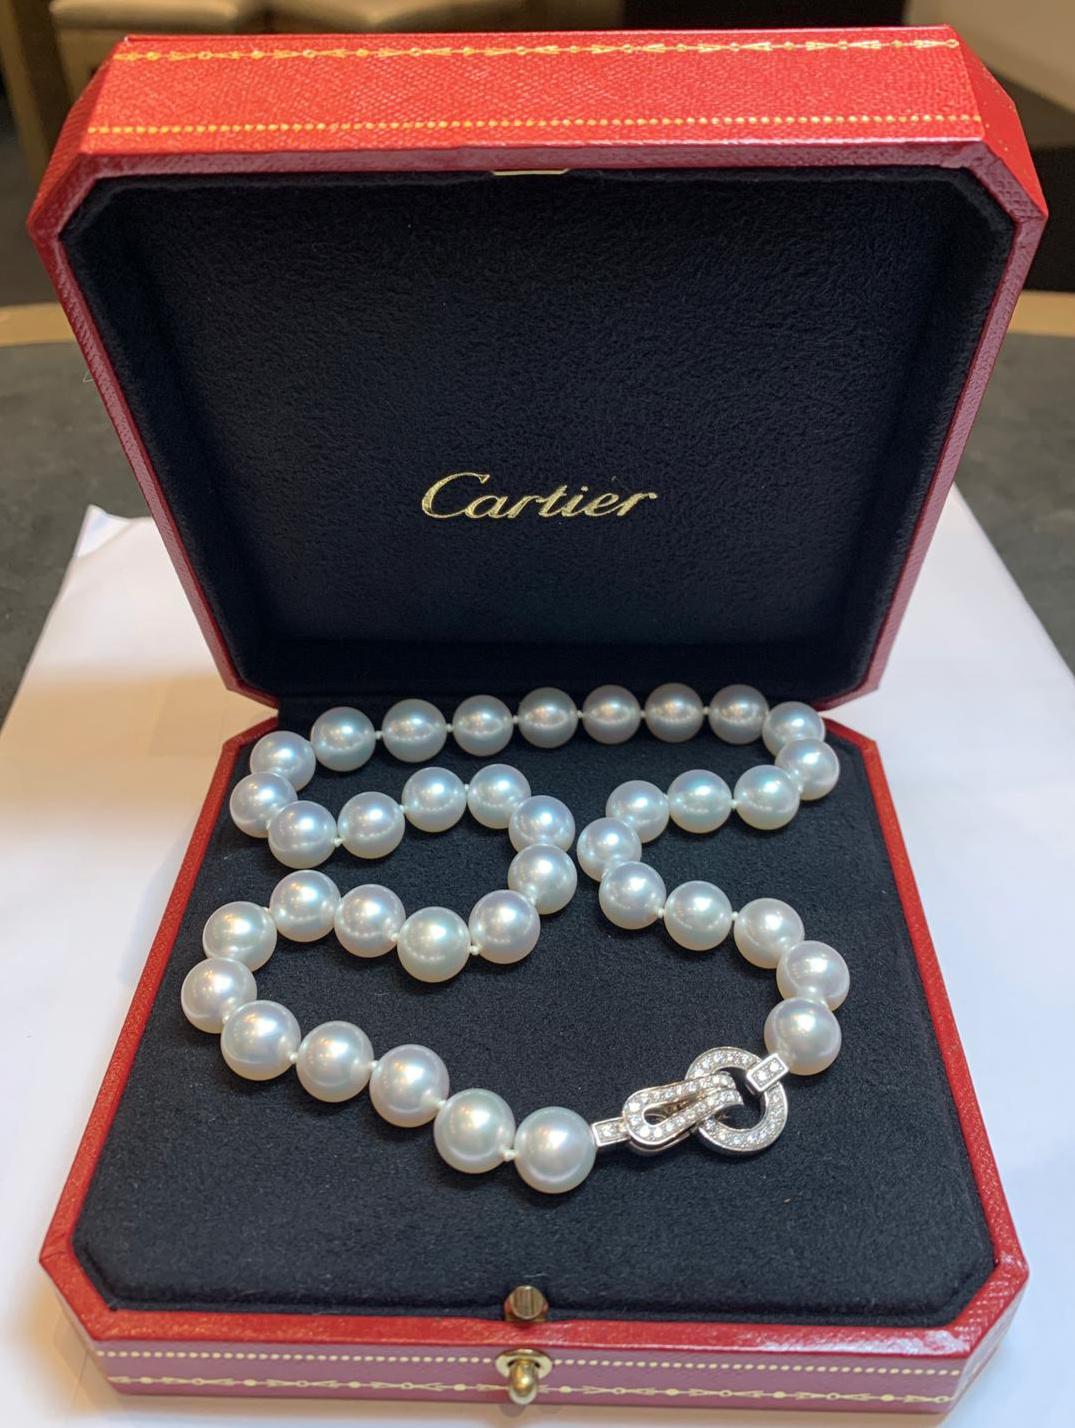 Round Cut Exceptional Cartier South Sea Pearls Necklace